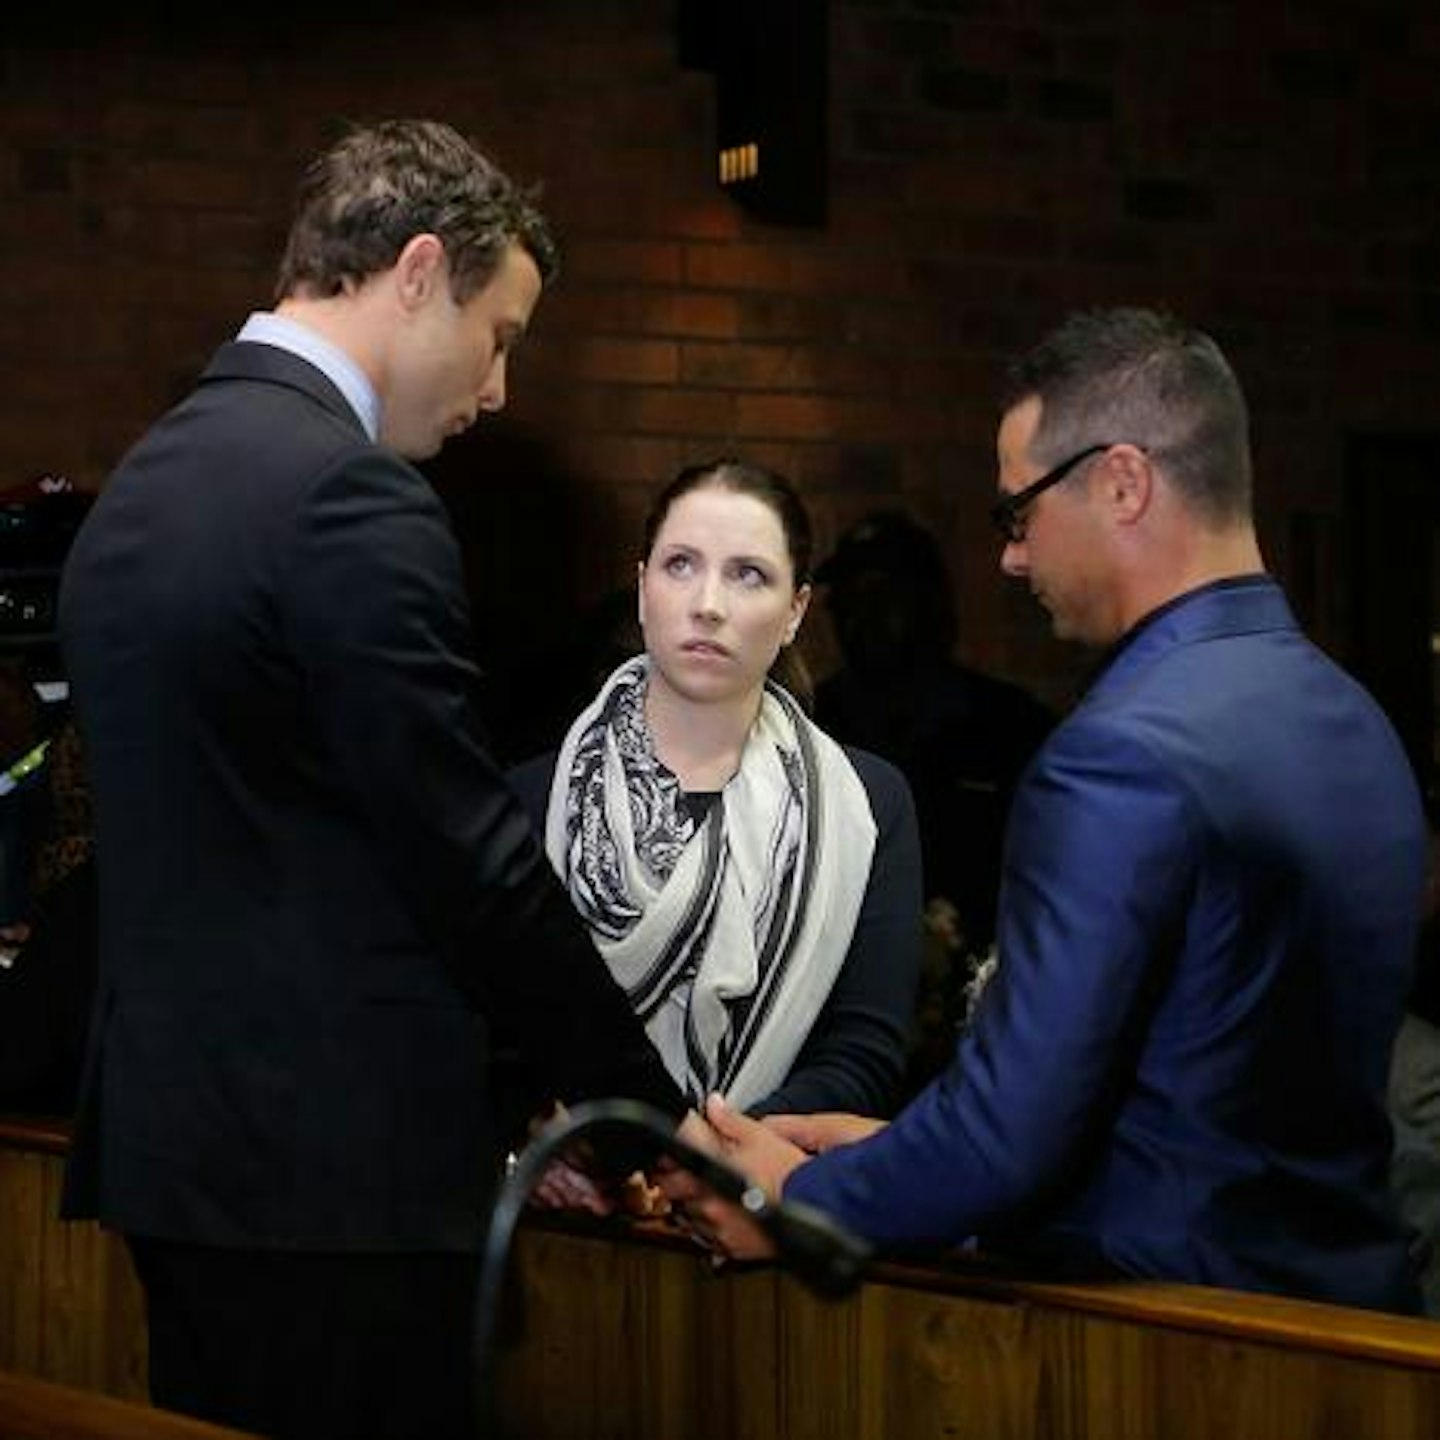 Oscar Pistorius holding hands with his siblings Aimee and Carl